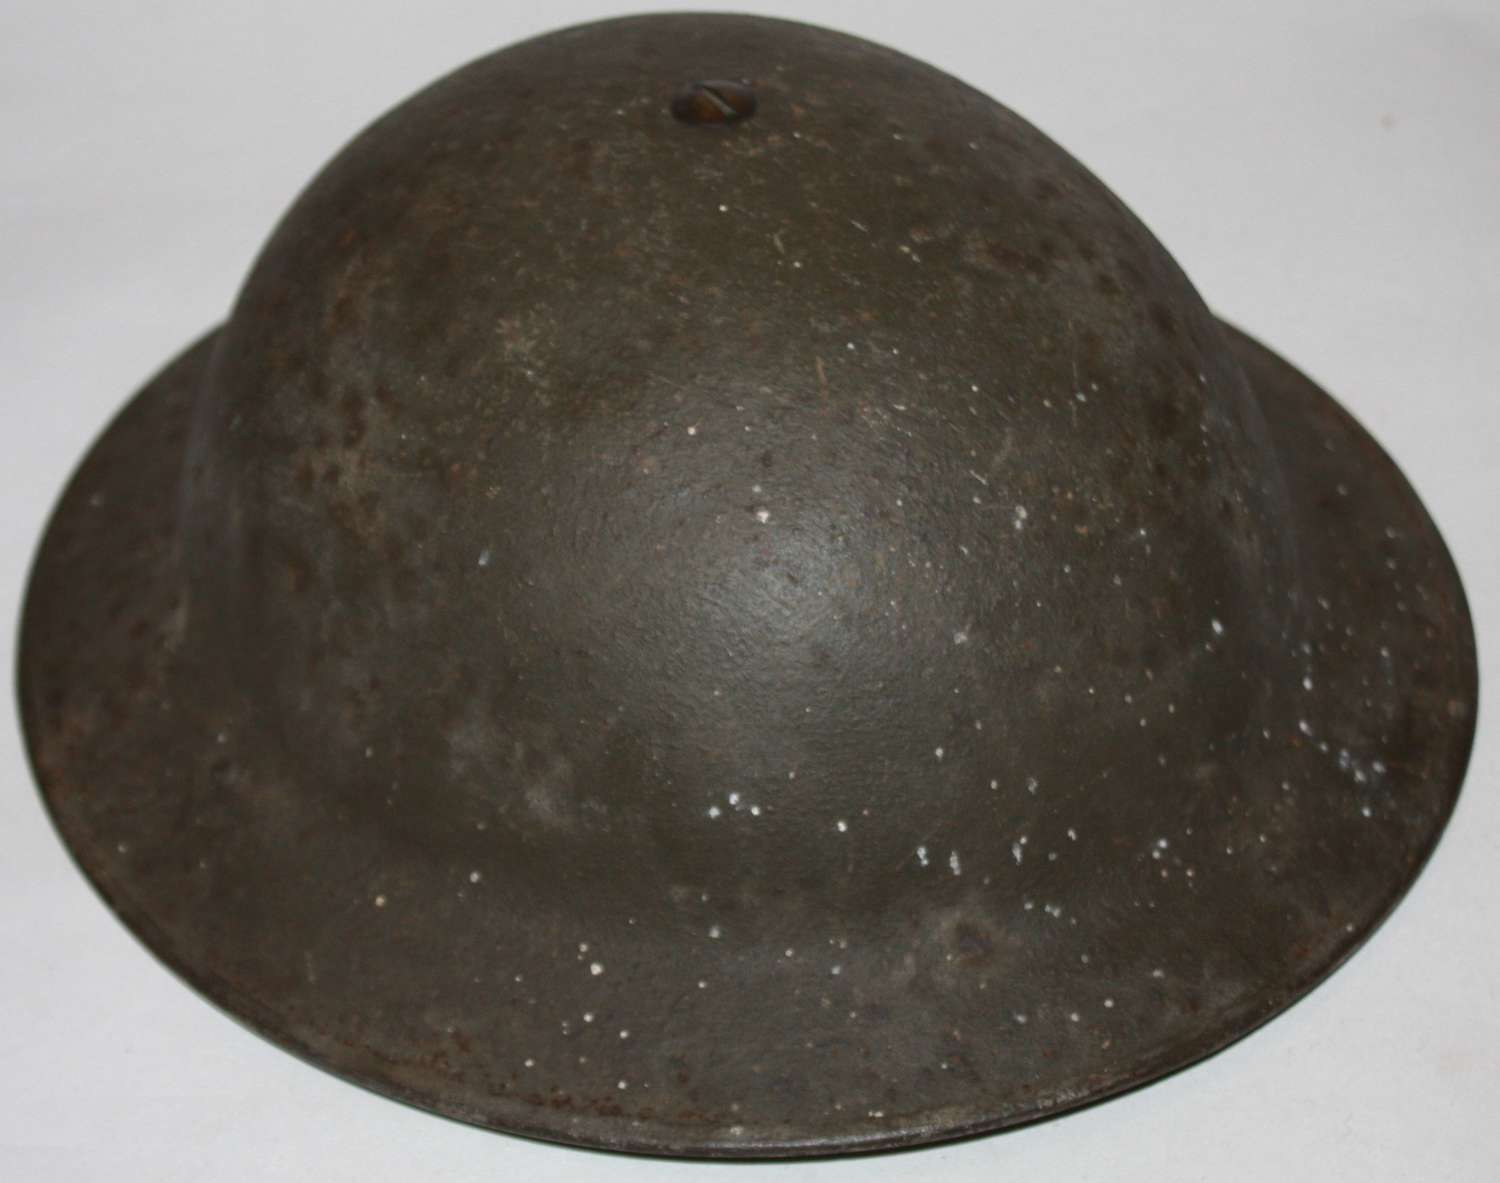 A VERY GOOD 1939 DATED ROUGH TEXTURED MKII HELMET